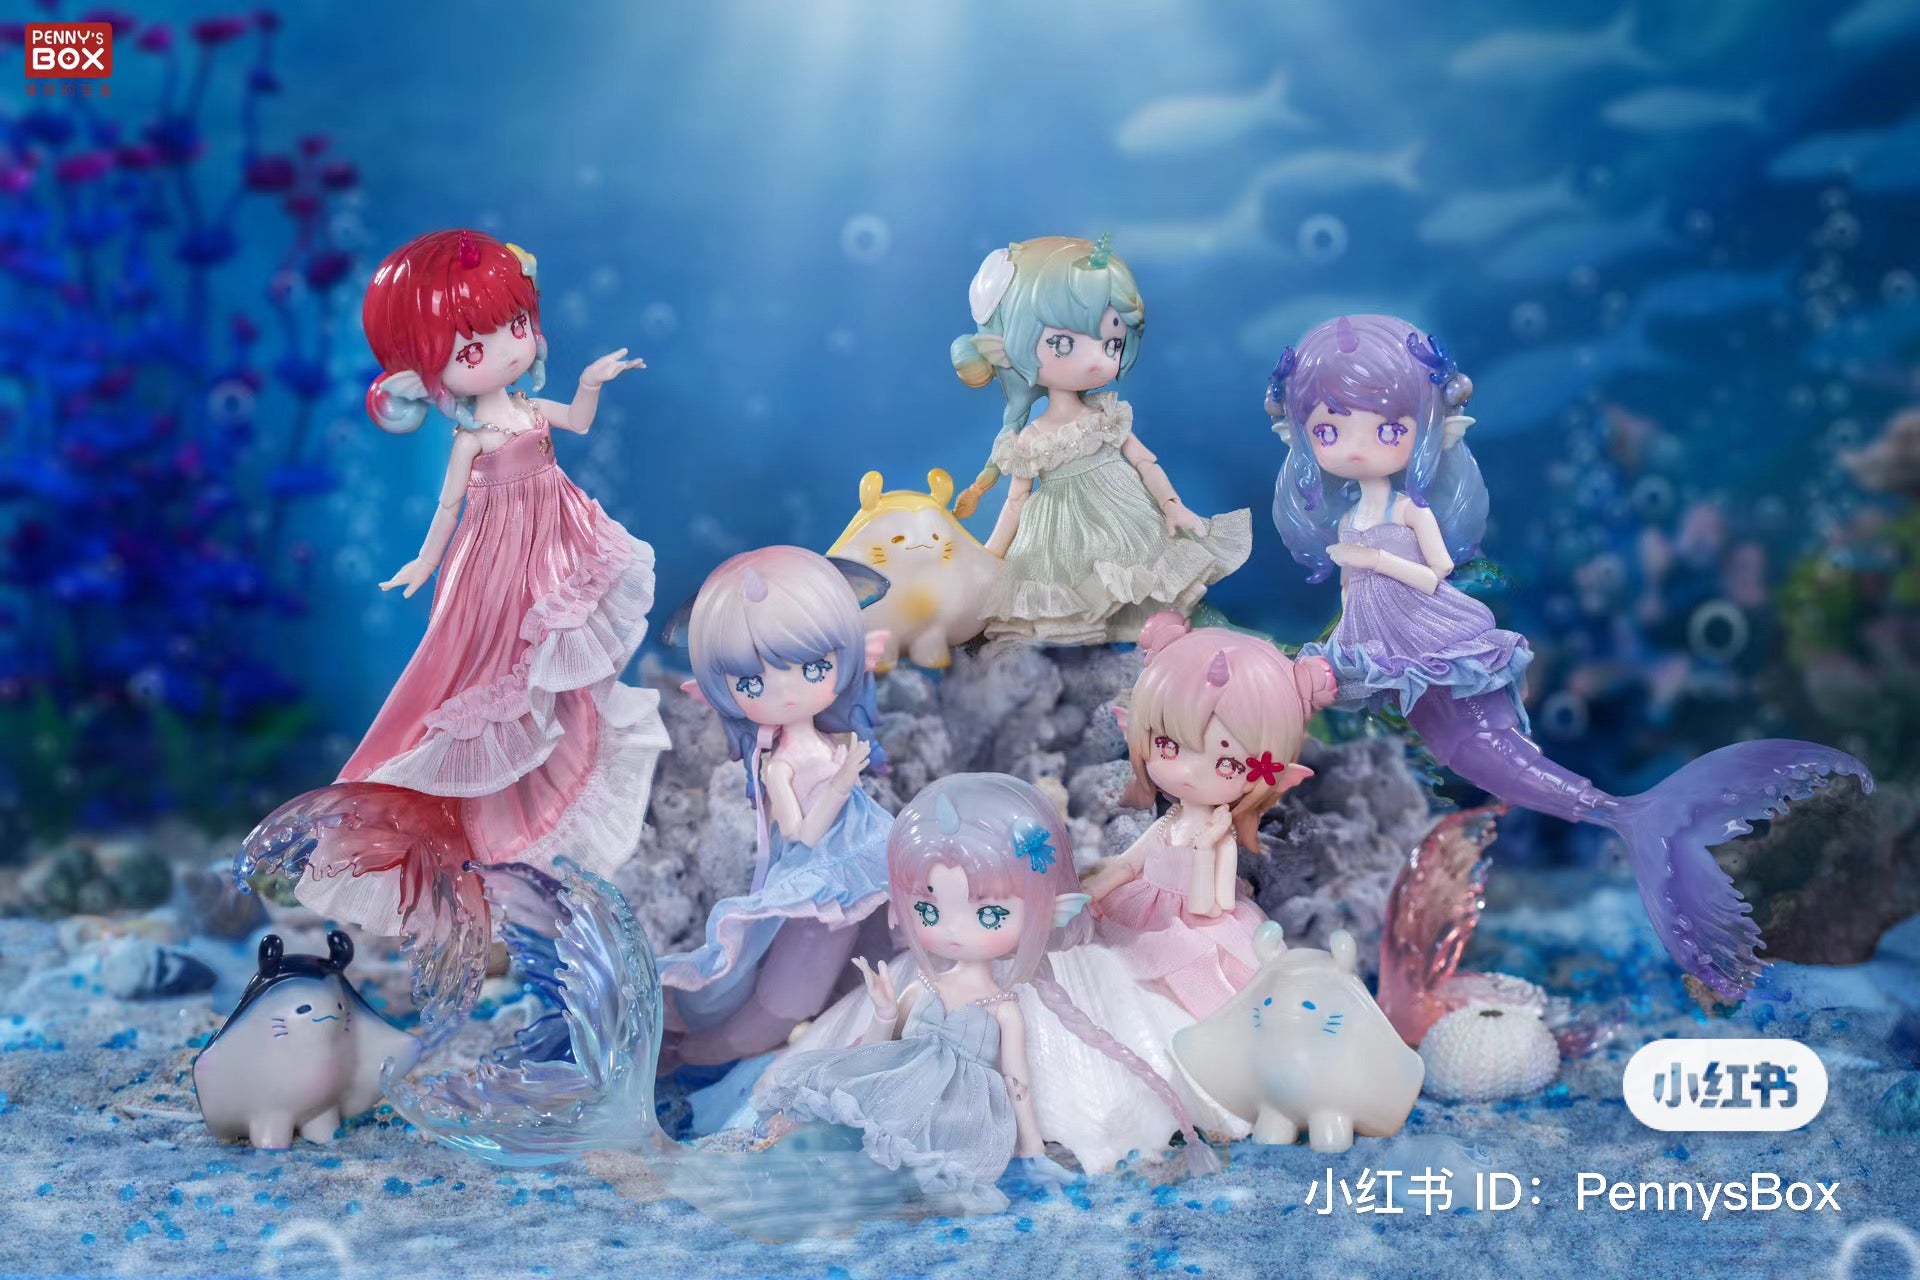 A group of figurines including a mermaid doll from A Secret About Mermaids BJD Blind Box Series.